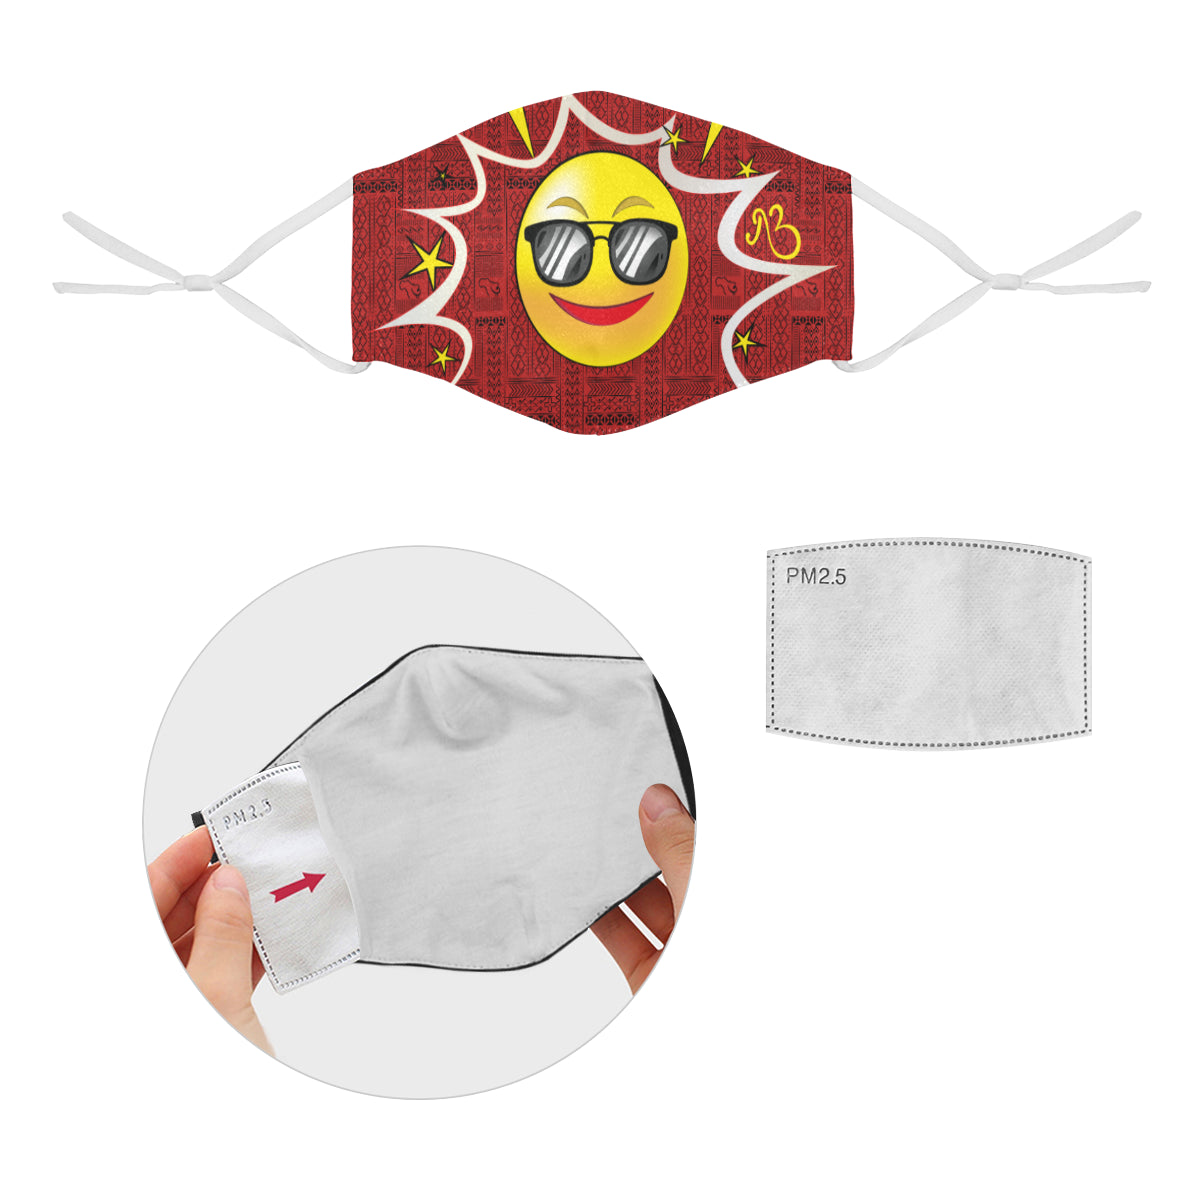 COOL Tribal Print Comic Emoji Cotton Fabric Face Mask with Filter Slot and Adjustable Strap - Non-medical use (2 Filters Included)